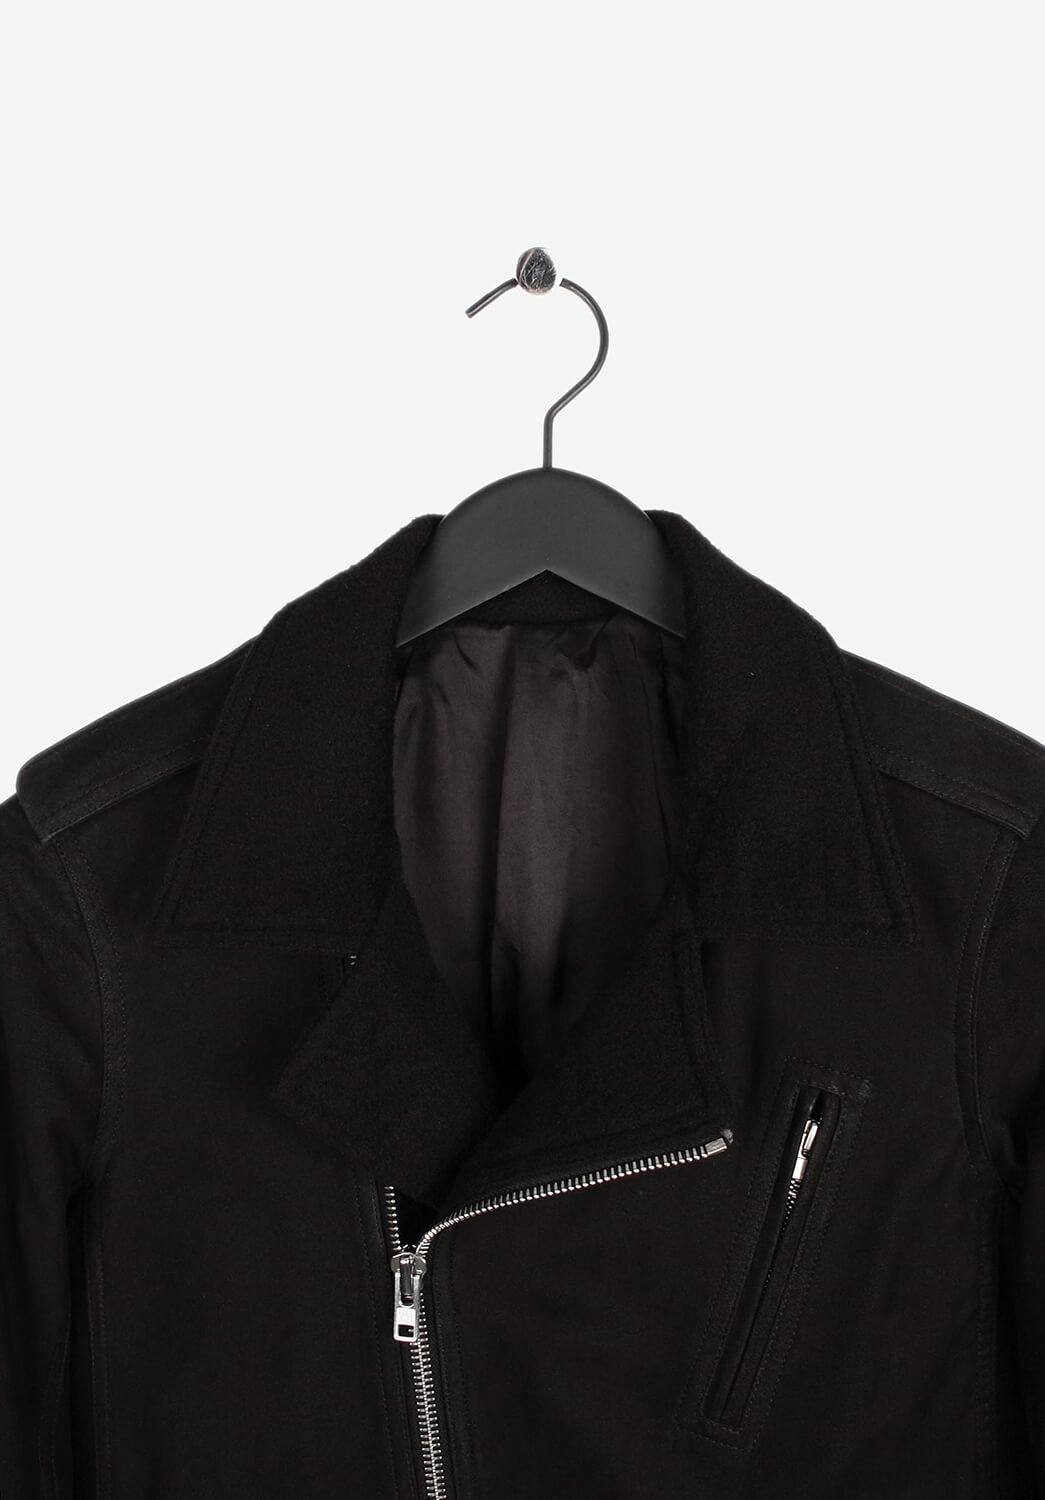 Item for sale is 100% genuine Rick Owens Biker Leather Jacket AW15
Color: Black
(An actual color may a bit vary due to individual computer screen interpretation)
Material: Suede leather, inside cashmere
Tag size: 48IT(M)
This jacket is great quality